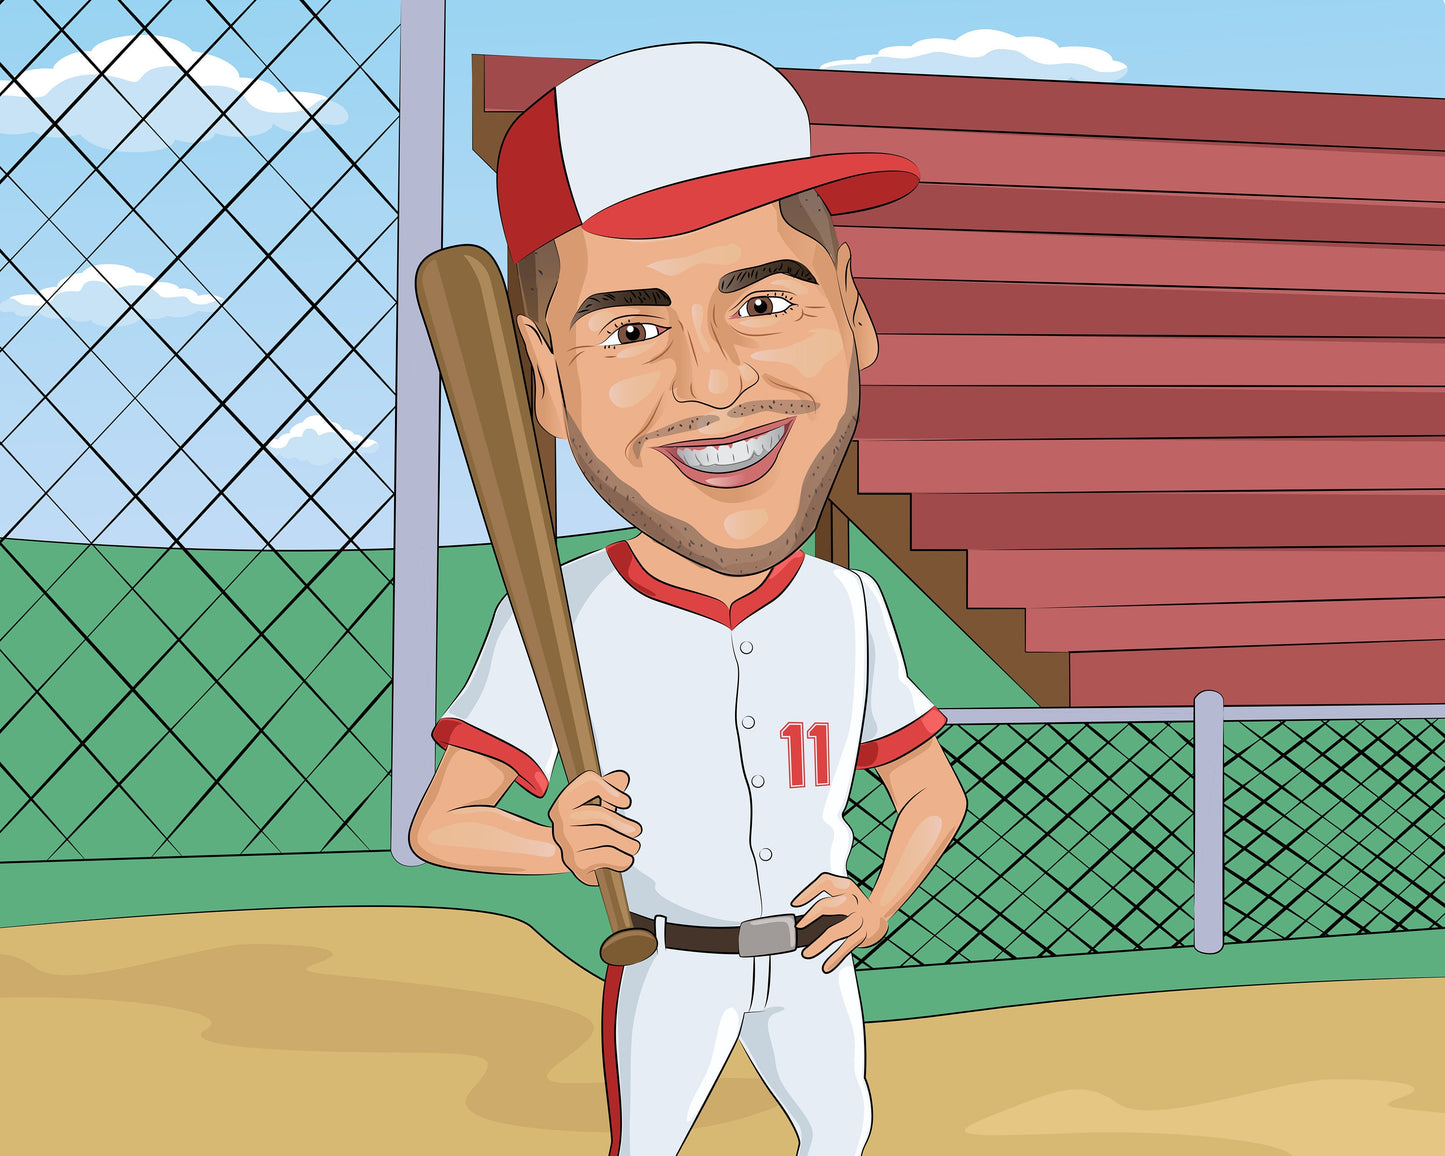 Baseball coach gift - Custom Caricature Portrait From Your Photo/Baseball Player gift